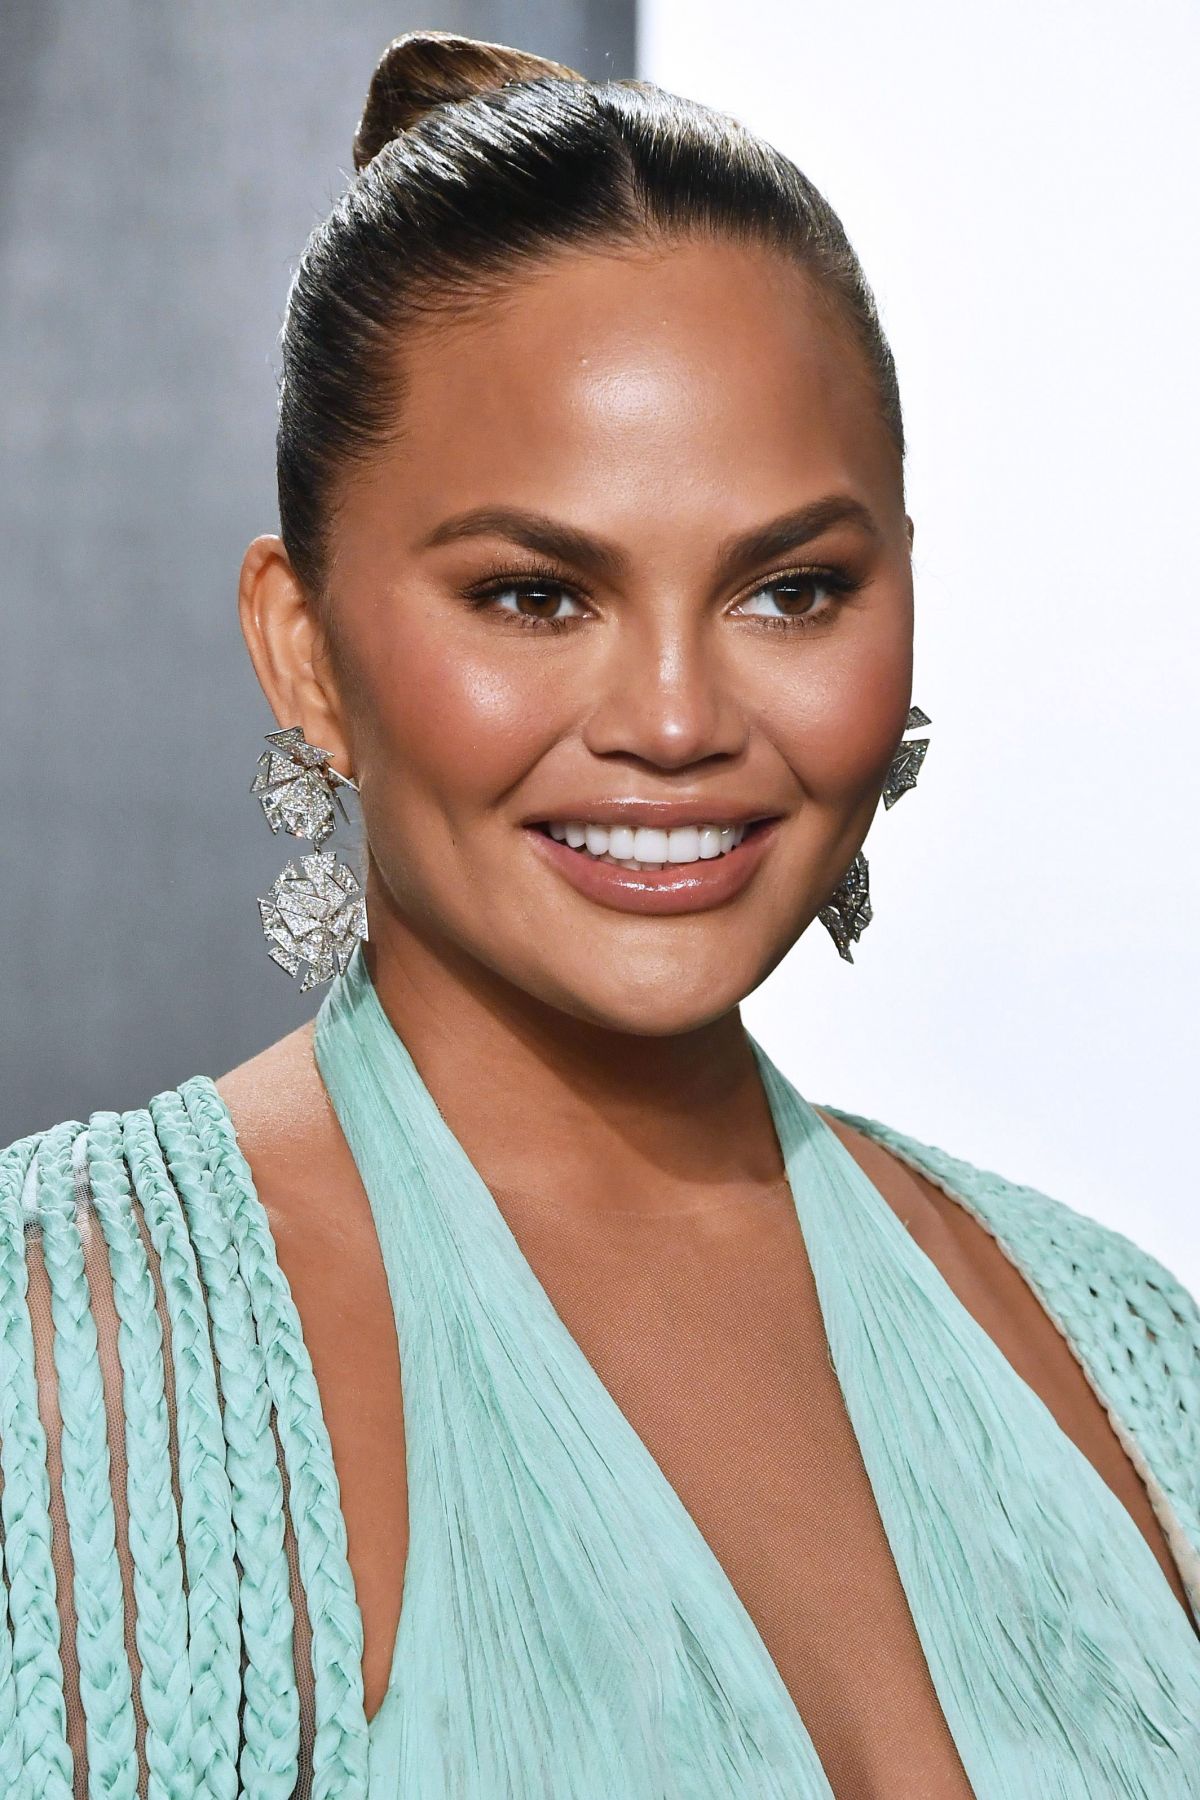 American model Chrissy Teigen took this step for protesters